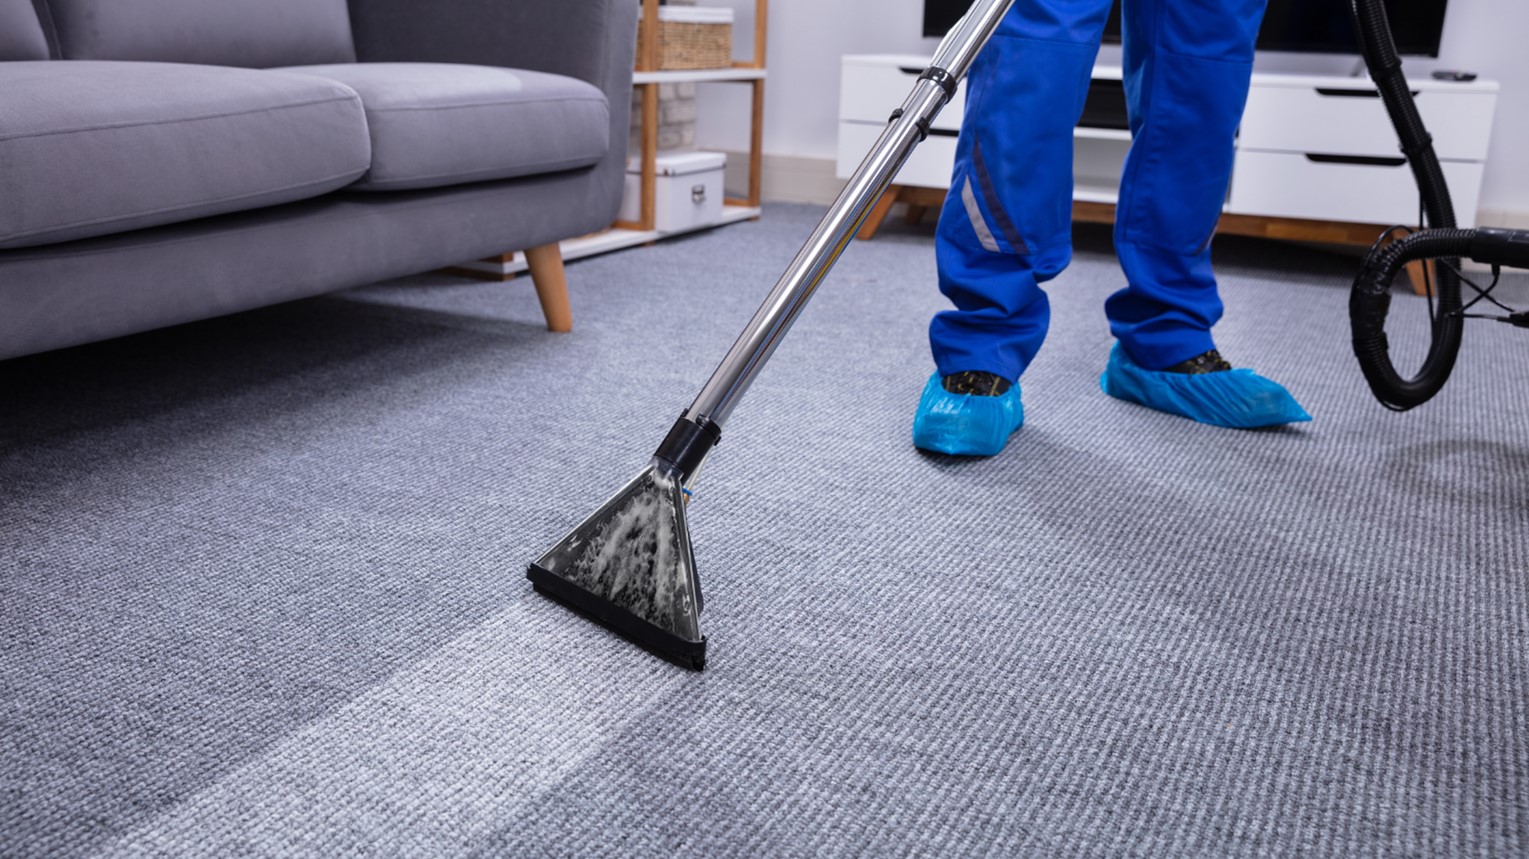 Common Winter Cleaning Tasks According To The Top Janitorial Services In Olathe